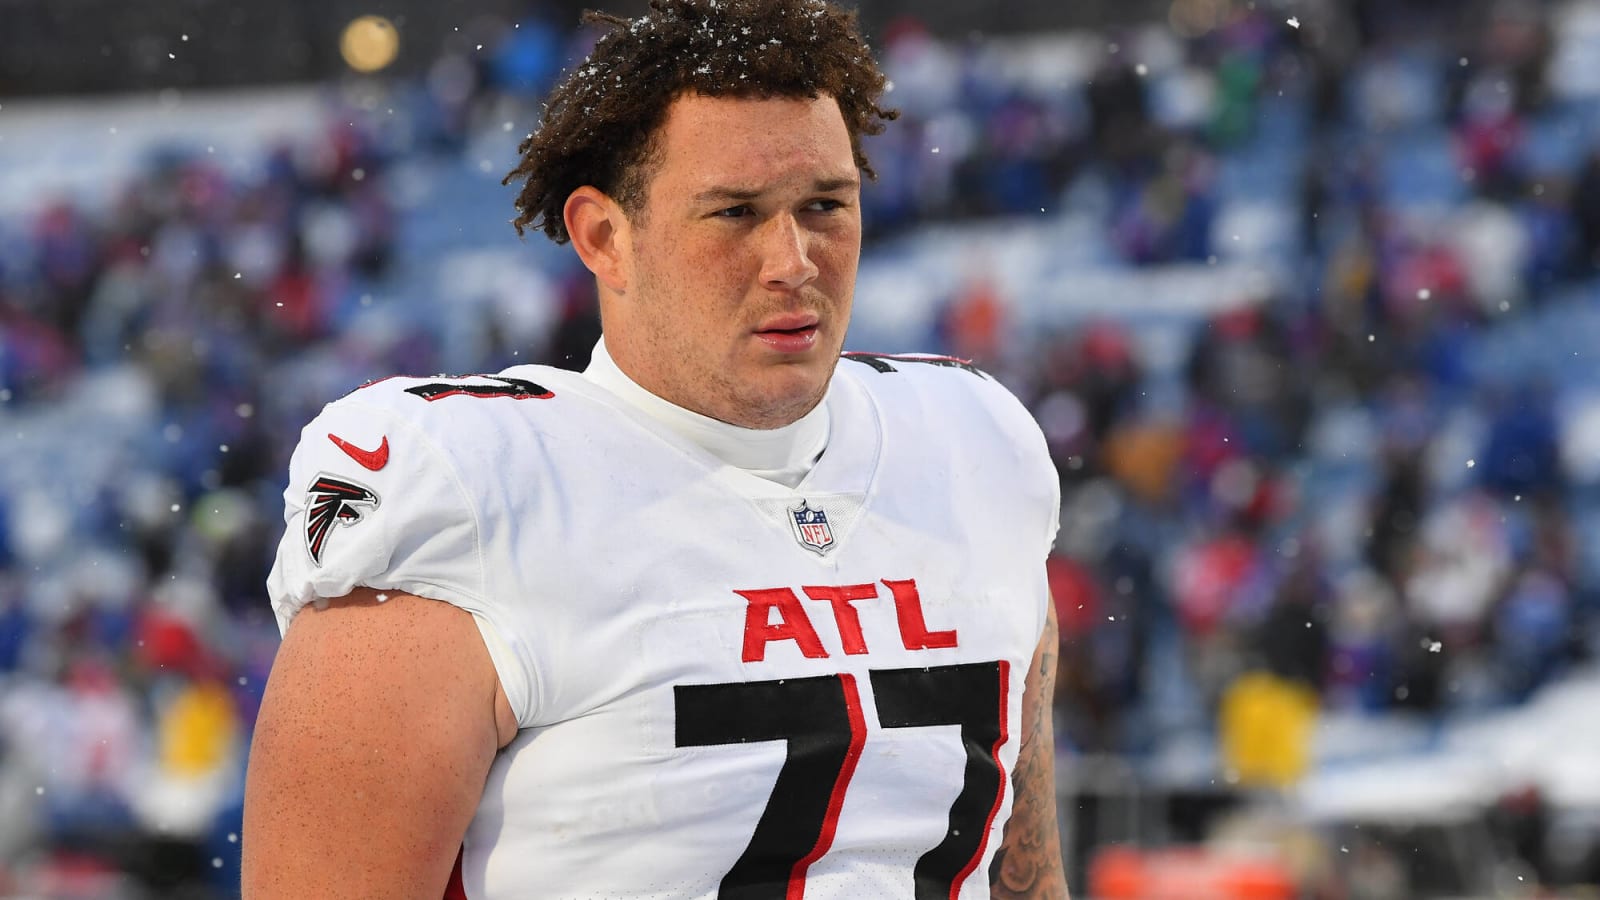 Falcons initial practice squad announced with a notable absence